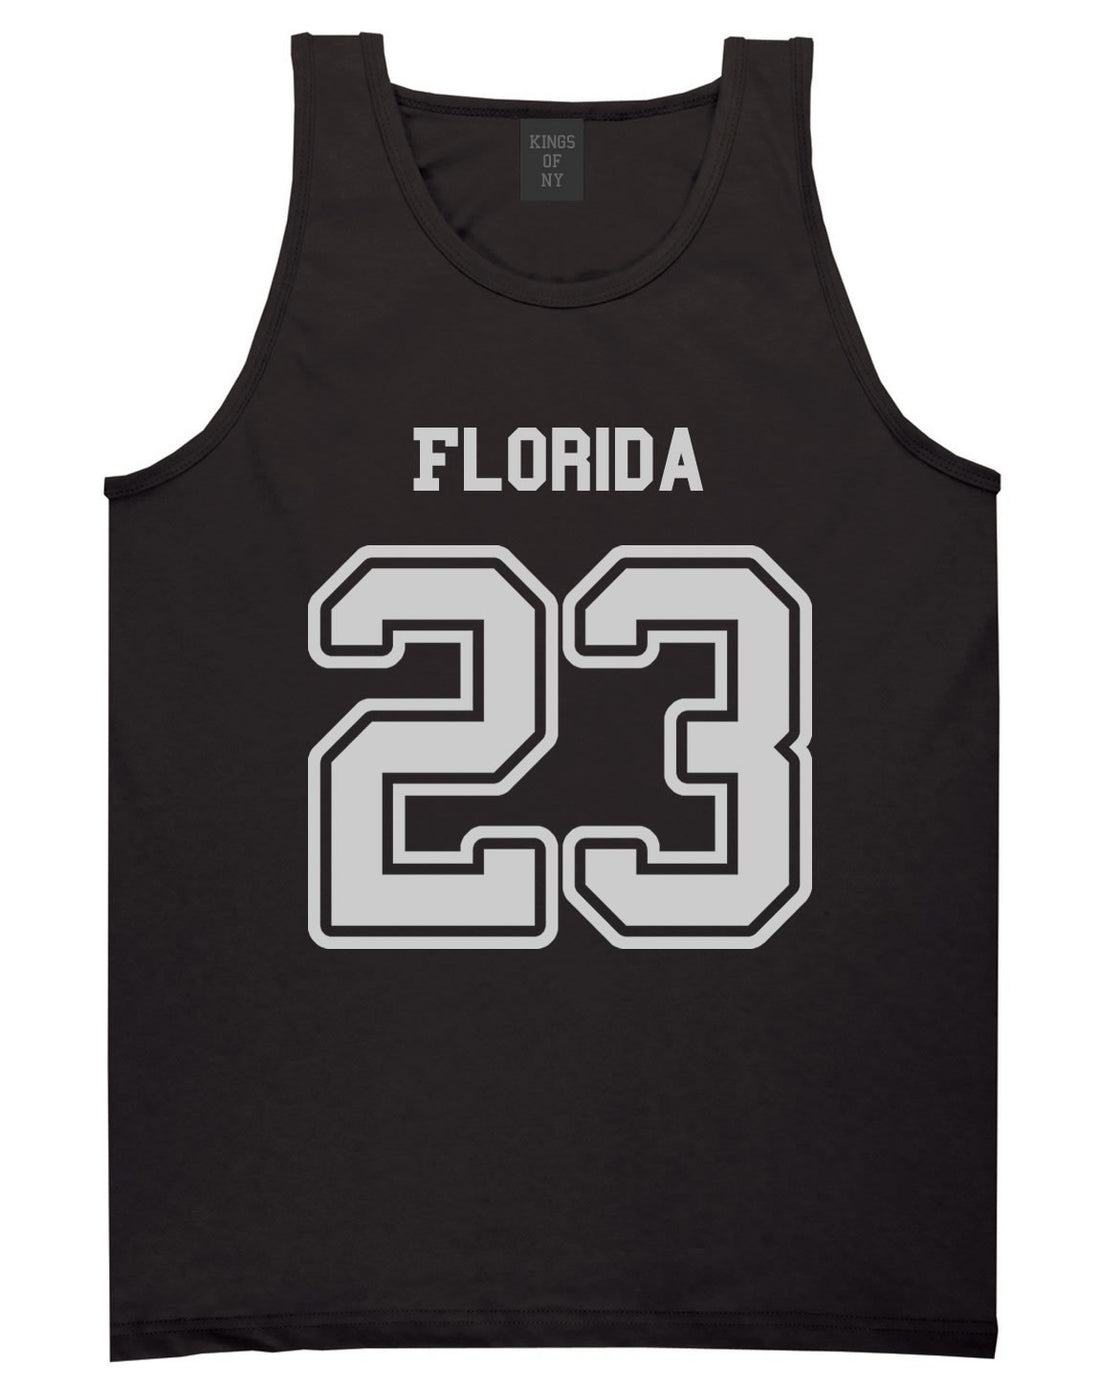 Sport Style Florida 23 Team State Jersey Mens Tank Top By Kings Of NY